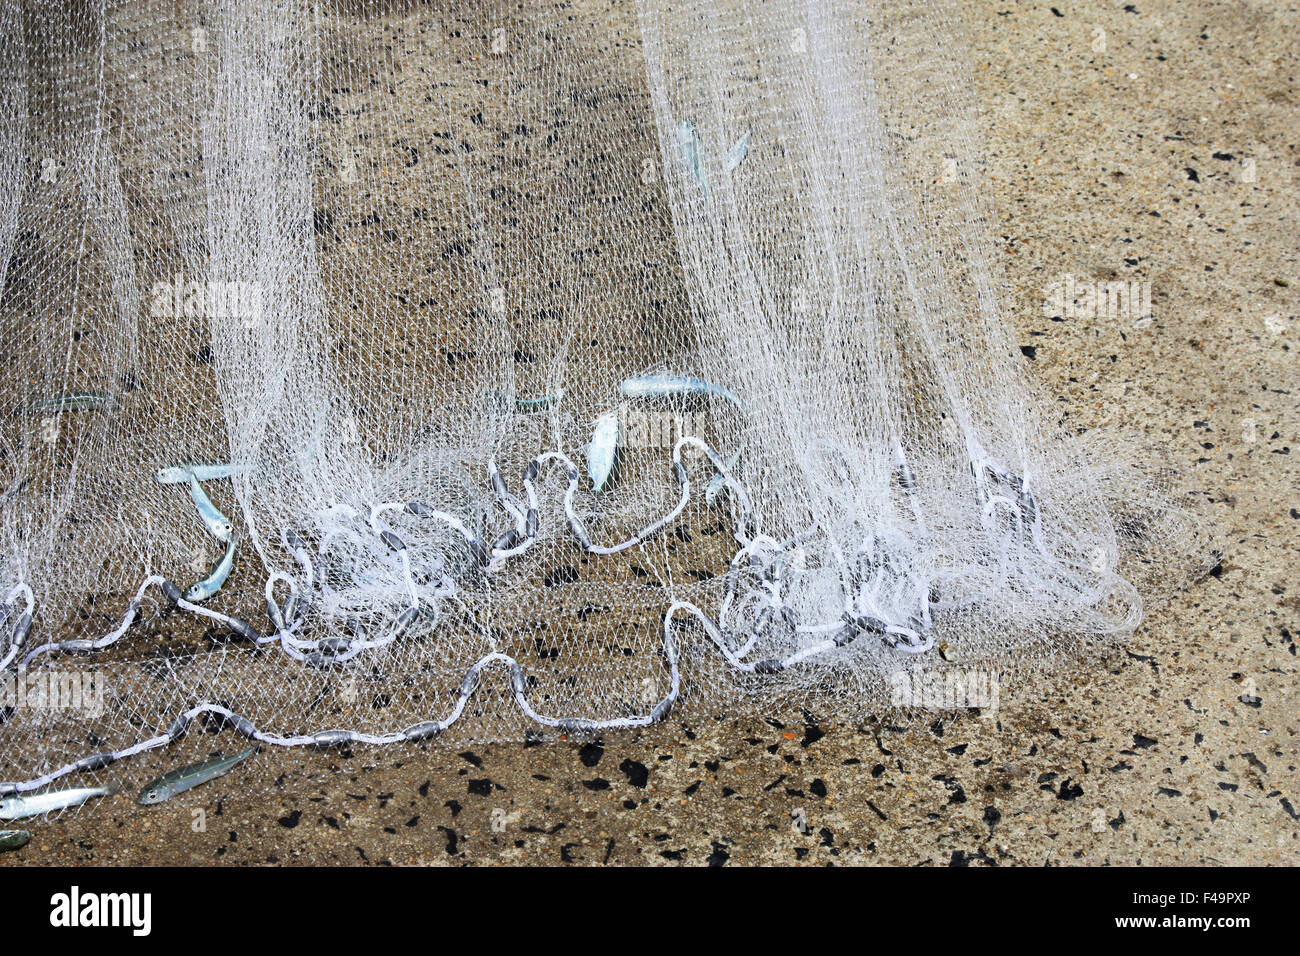 cast net used for catching bait fish Stock Photo - Alamy